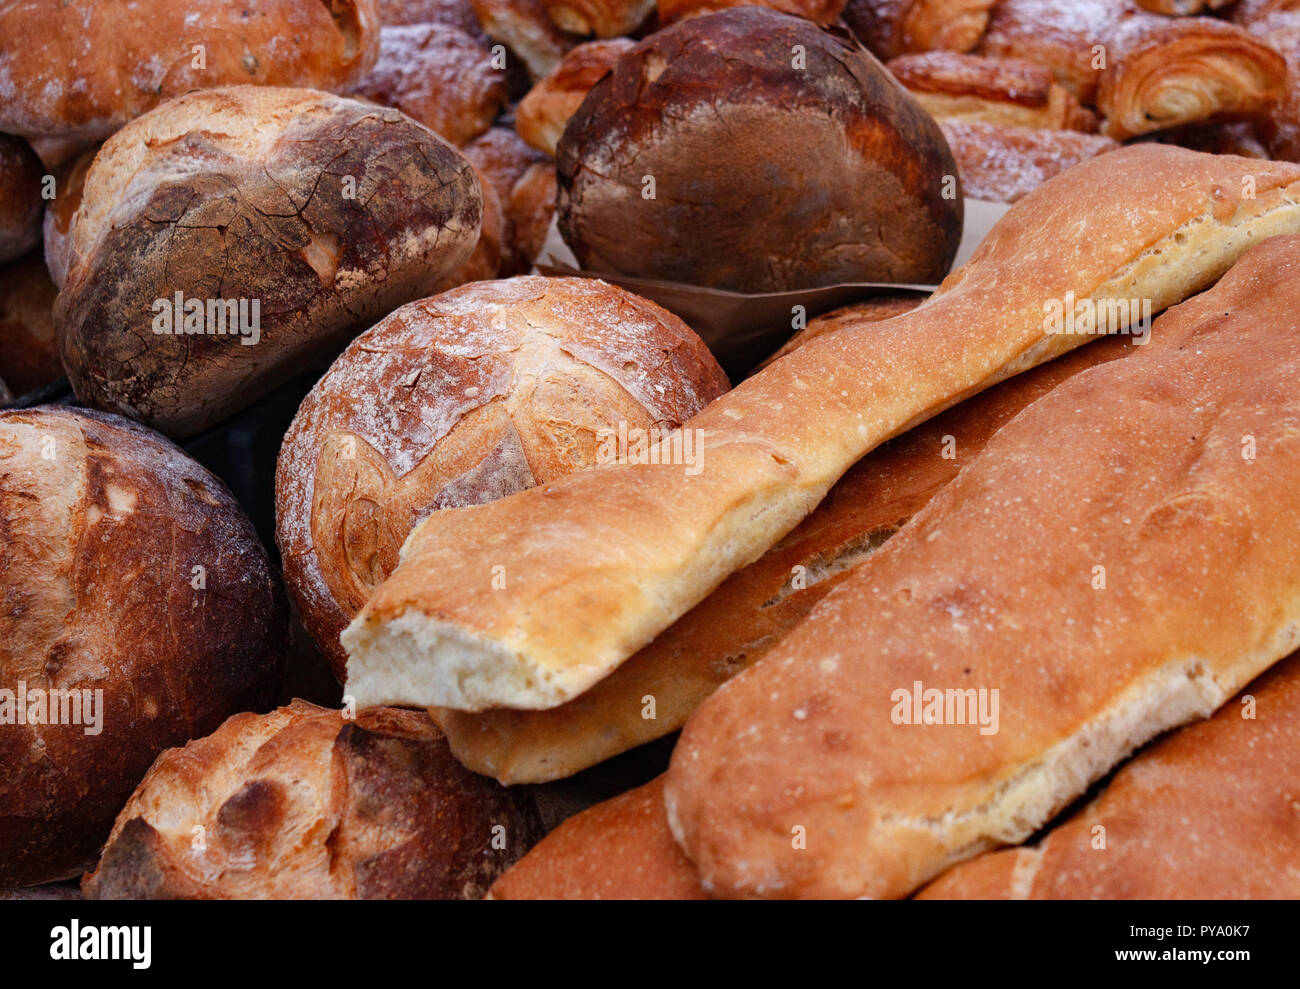 An image of various different types of gourmet bread. Stock Photo